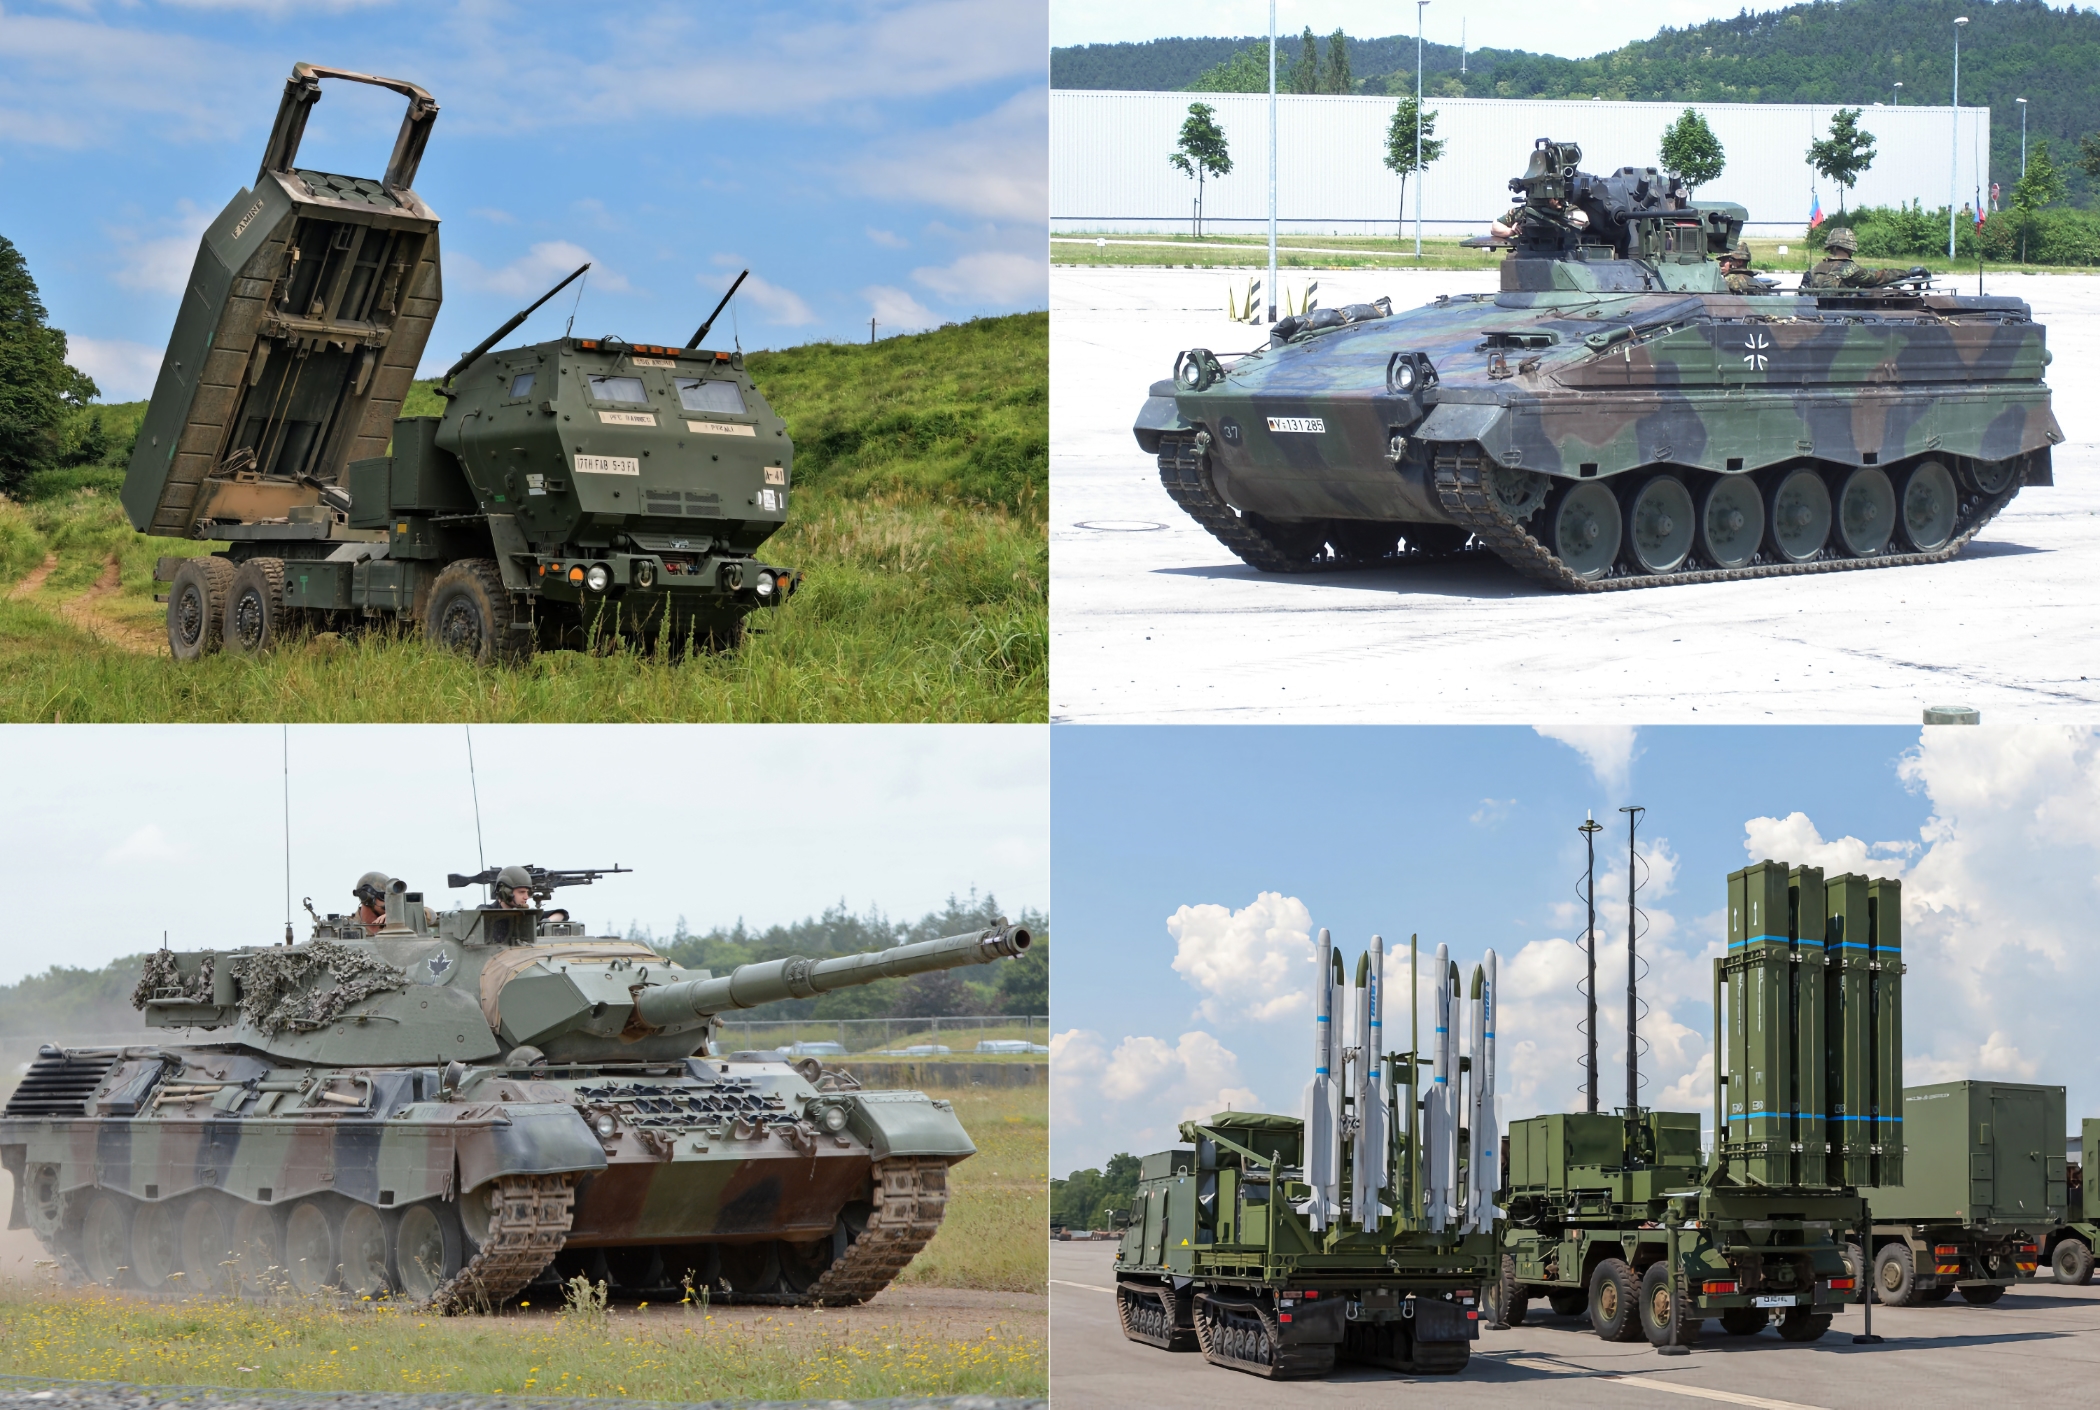 HIMARS, Marder 1A3, Leopard 1A5, IRIS-T SLM, IRIS-T SLS and WiSENT 1 MC: Germany has committed a large military aid package to Ukraine